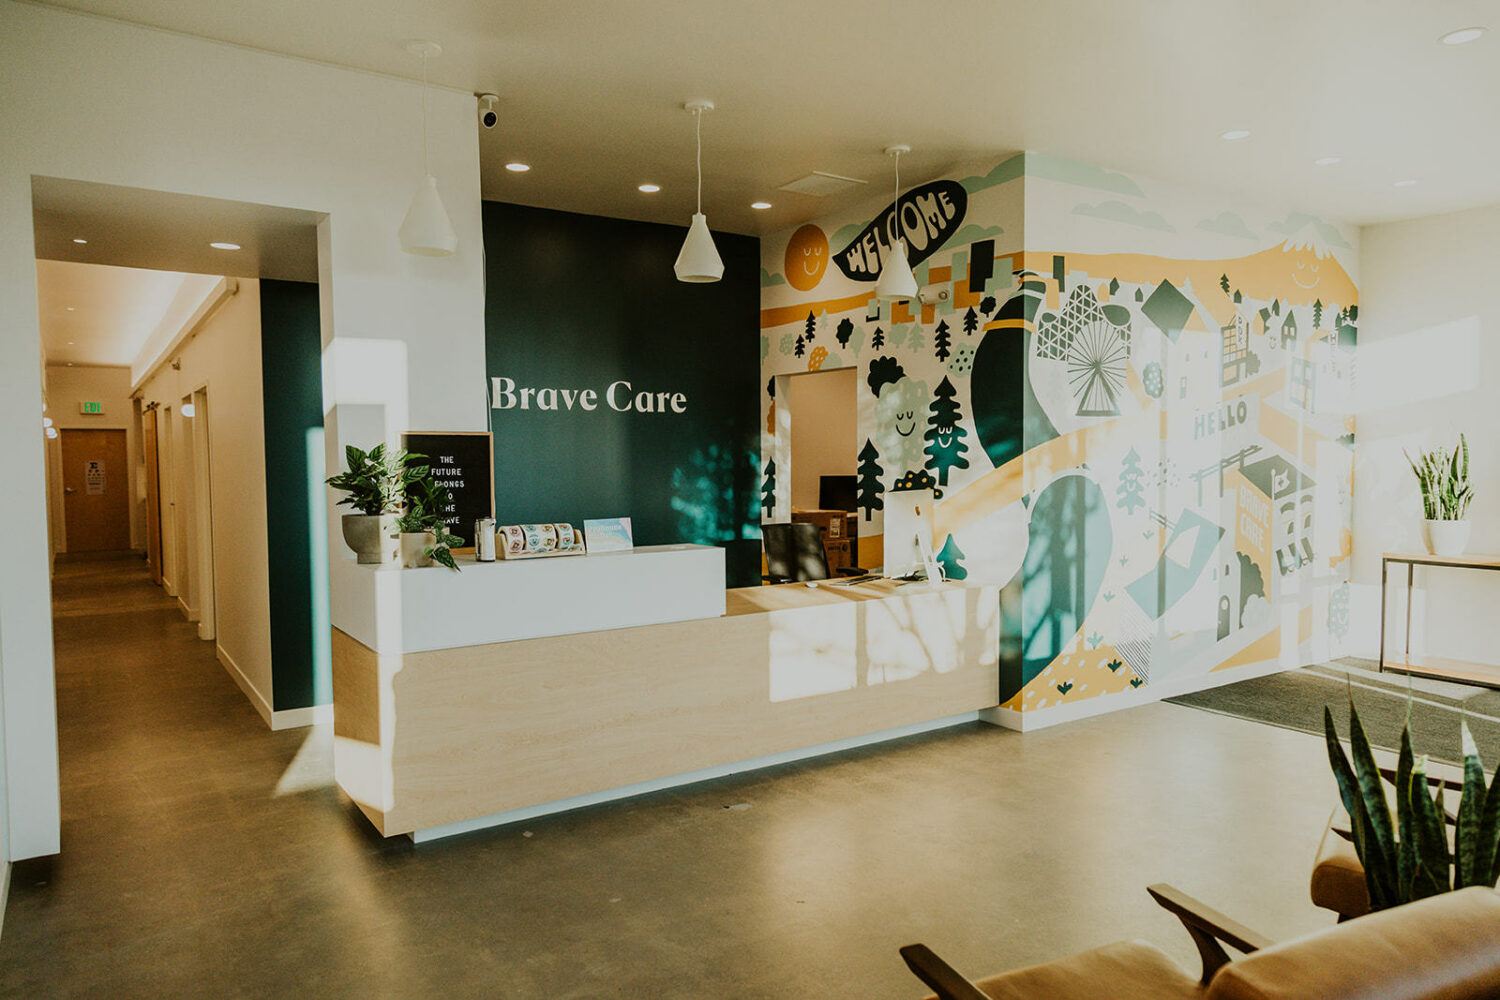 Brave Care Pediatric Primary and Urgent Care Expands Nationally and Raises $10M Series A